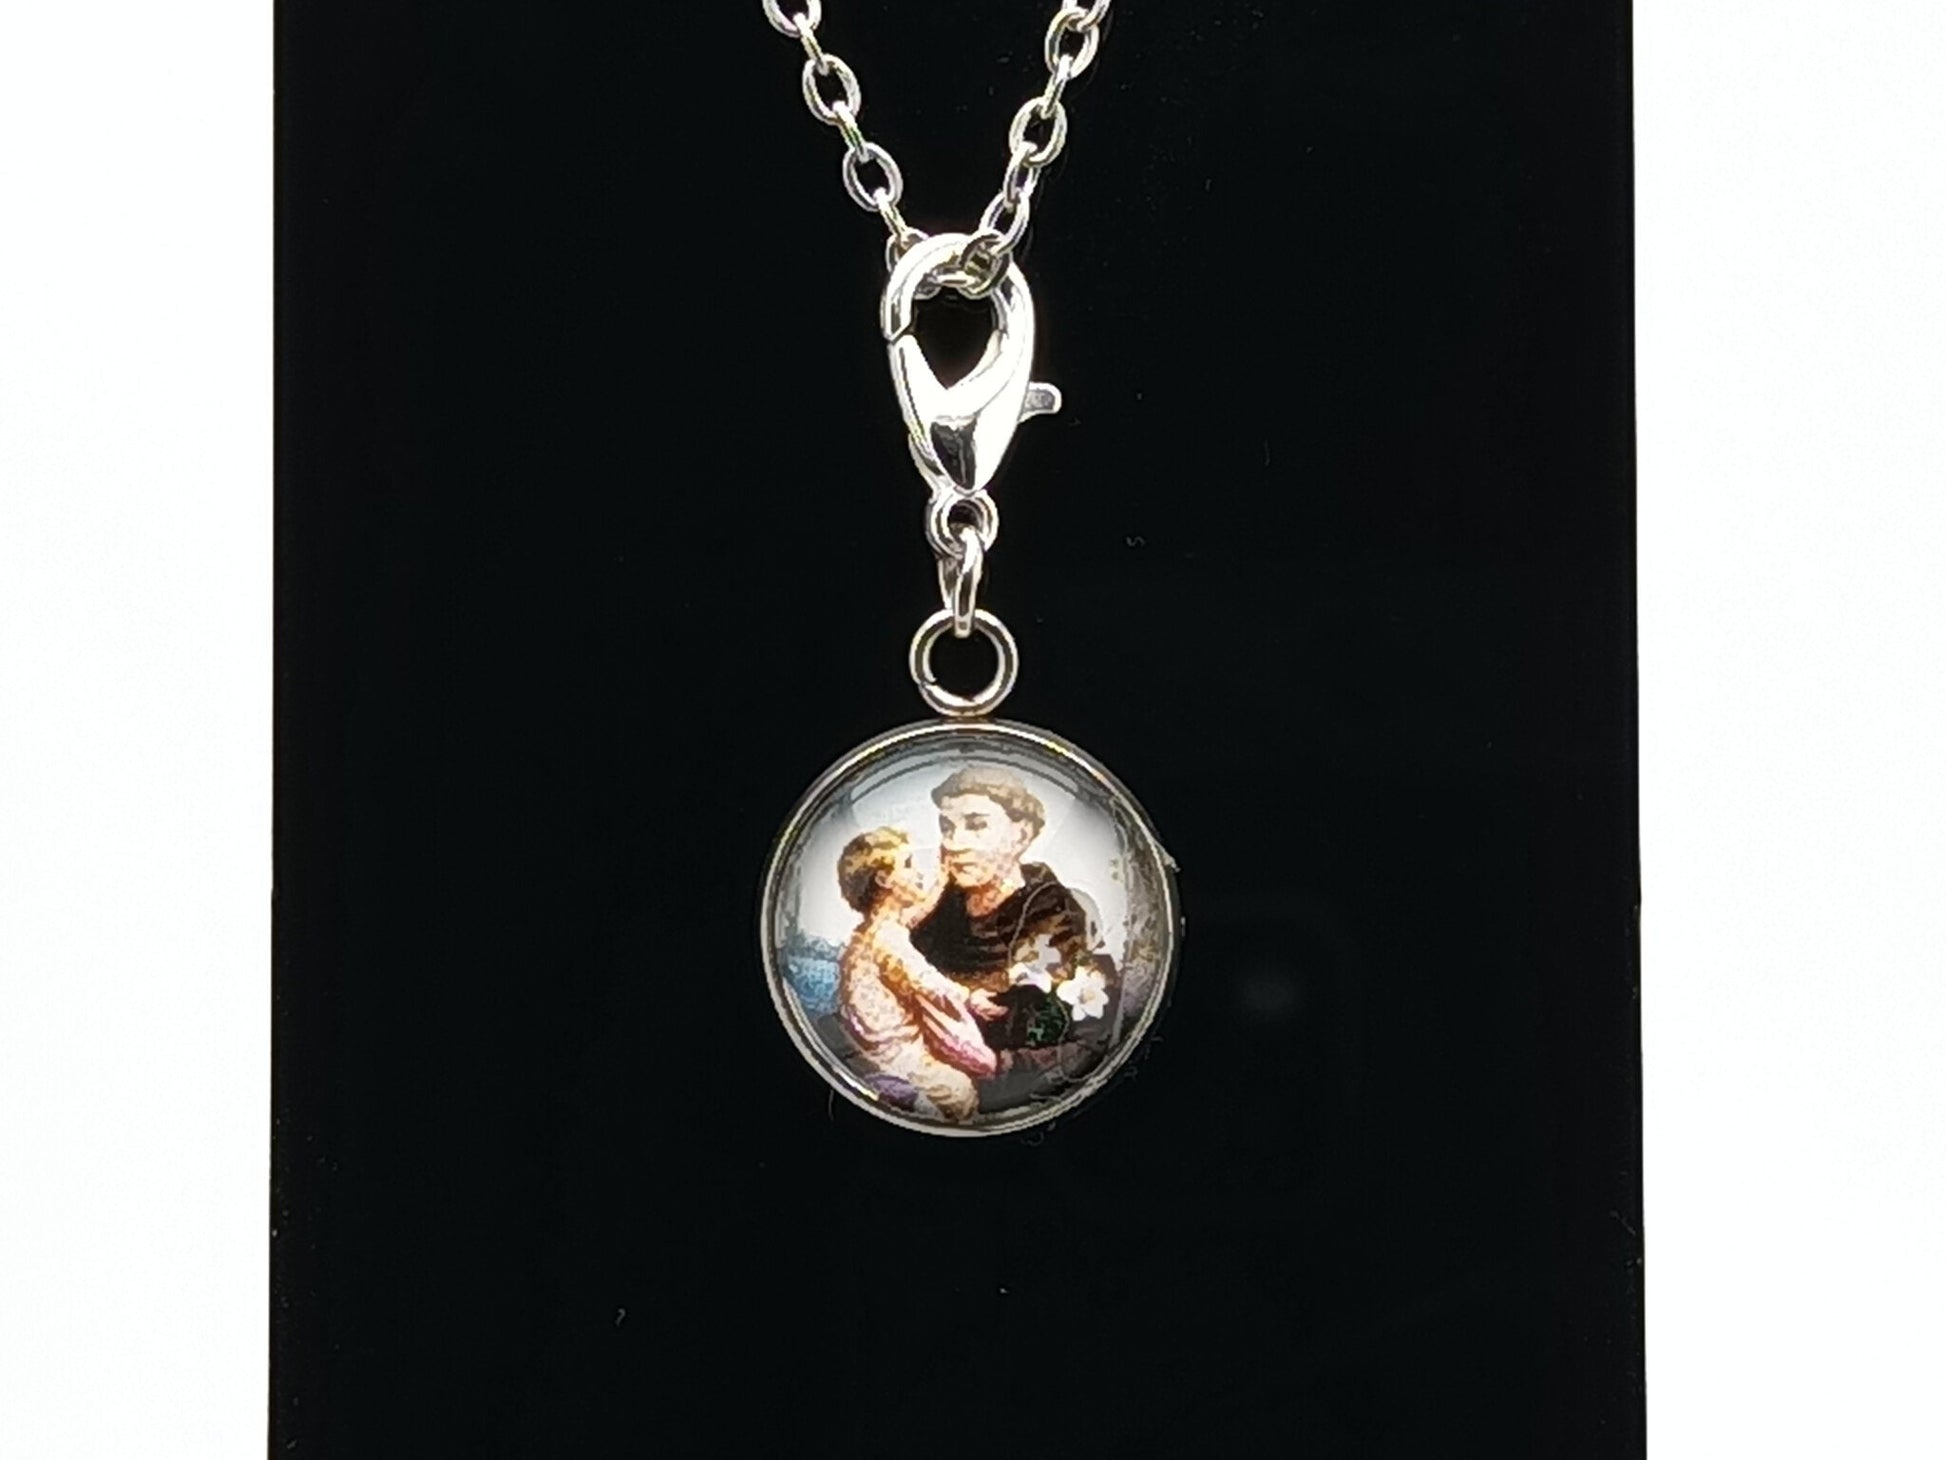 Saint Anthony of Padua unique rosary beads stainless steel picture medal with lobster clasp.